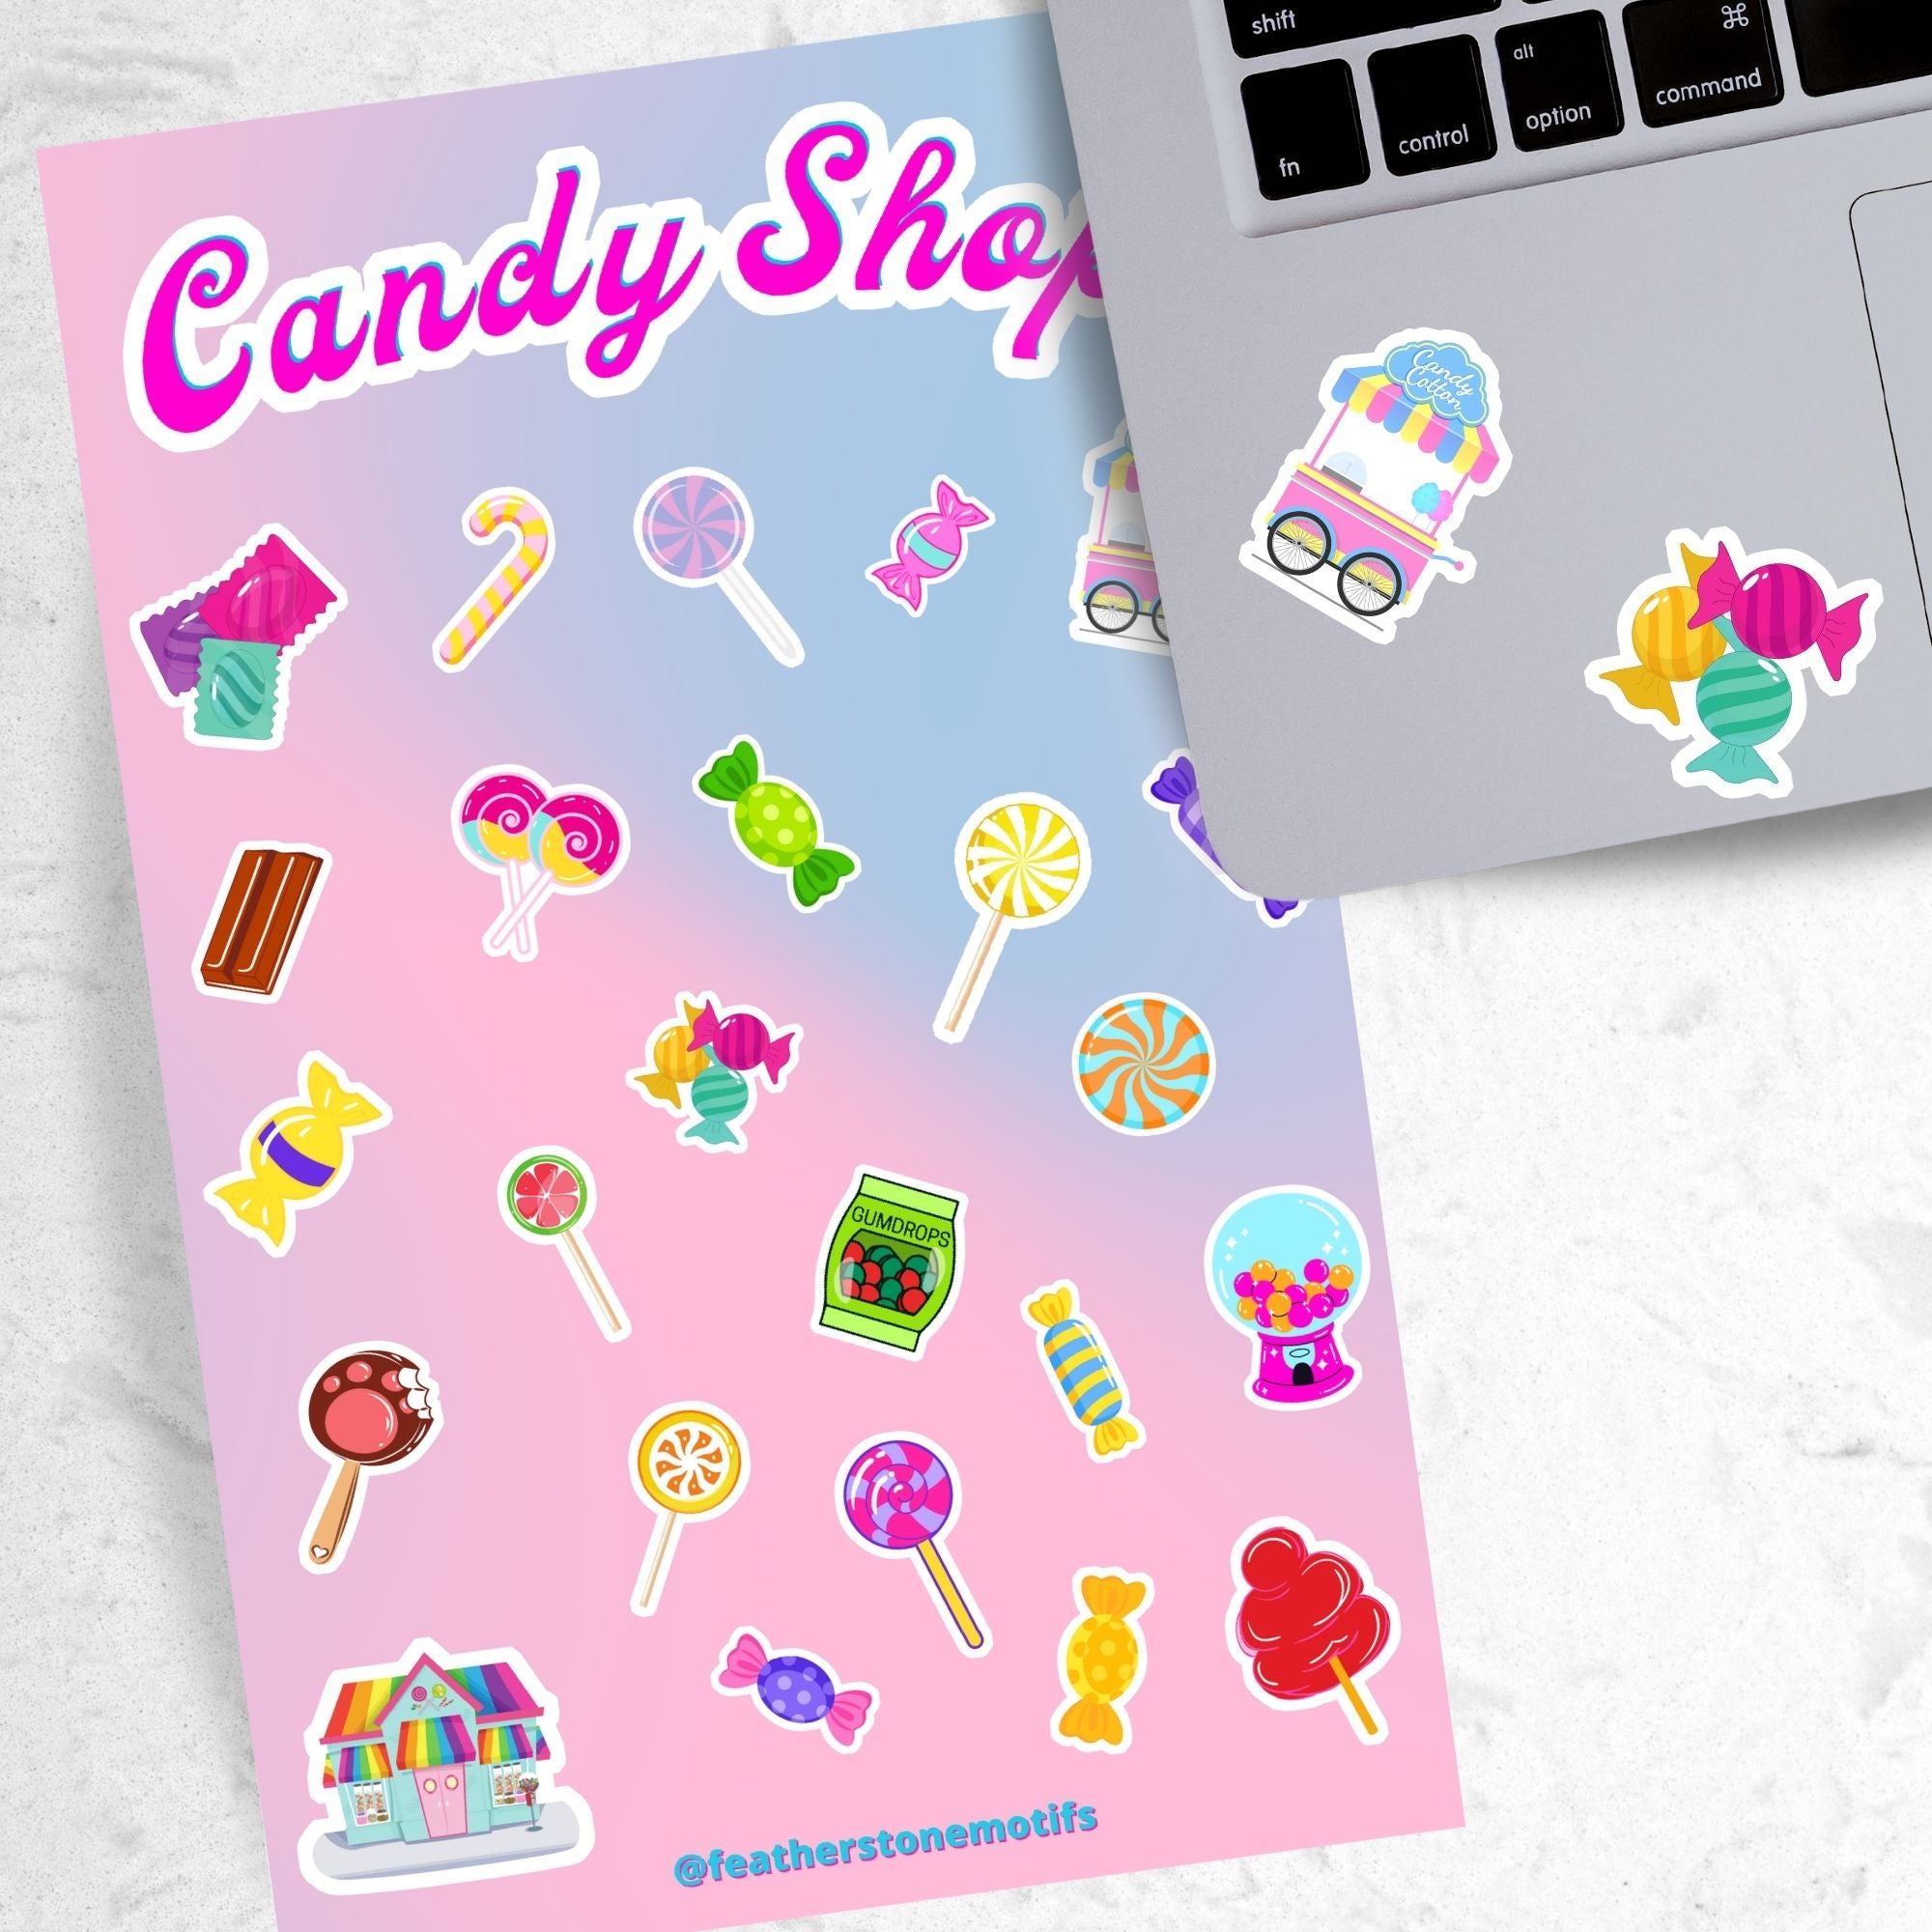 This sticker sheet is filled with stickers of all of your favorite sweet treats! Gumdrops, lollipops, cotton candy, and of course chocolate; this sheet will satisfy everyone's sweet cravings. This image shows the sticker sheet next to an open laptop with stickers of a candy cart and hard candies applied below the keyboard.